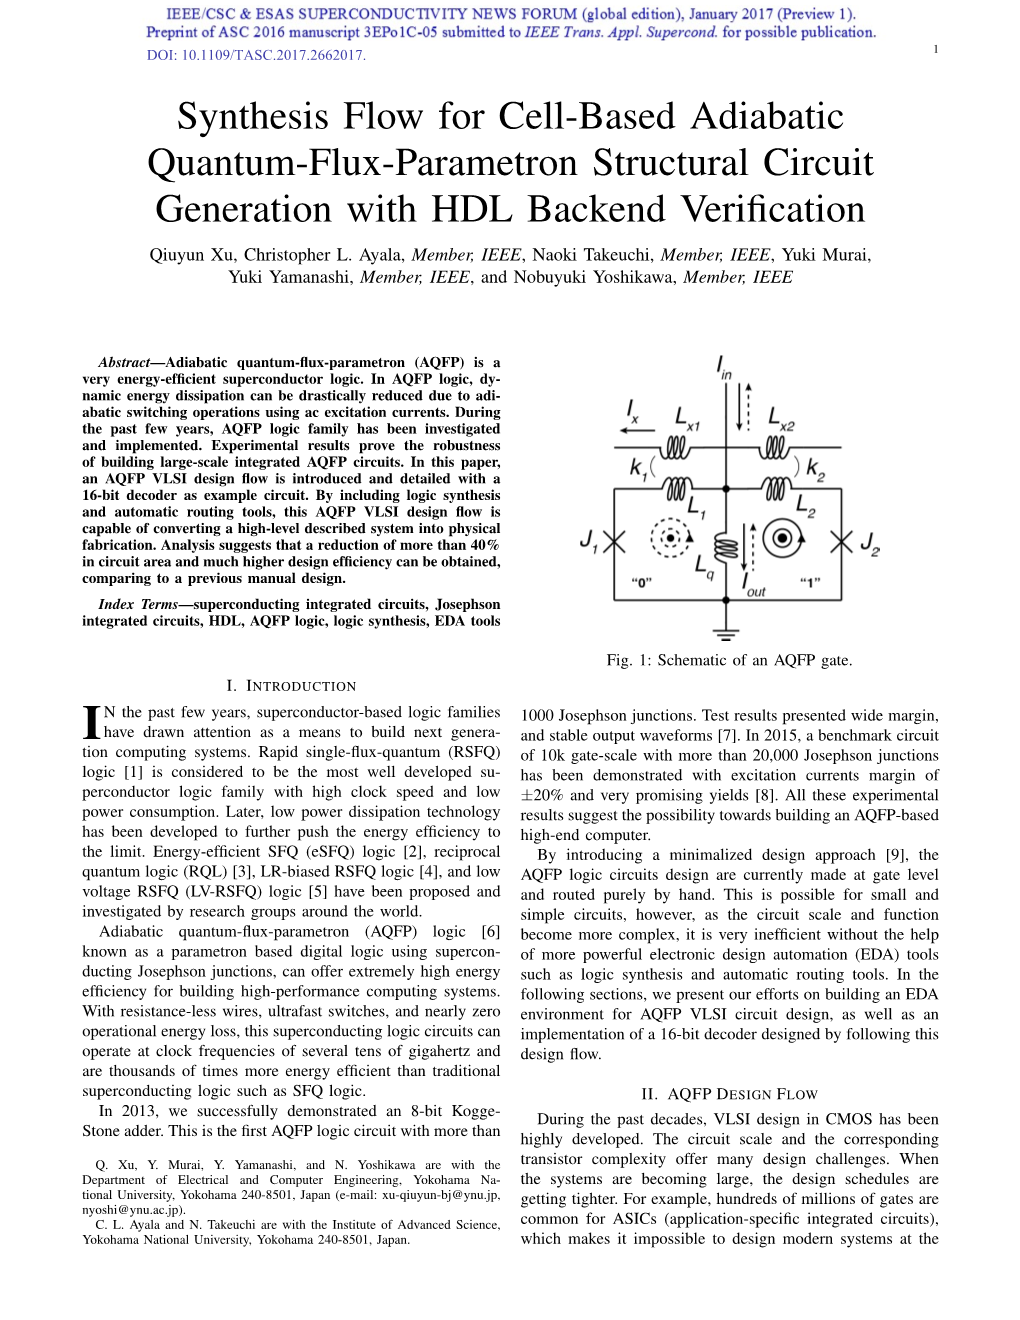 Synthesis Flow for Cell-Based Adiabatic Quantum-Flux-Parametron Structural Circuit Generation with HDL Backend Veriﬁcation Qiuyun Xu, Christopher L